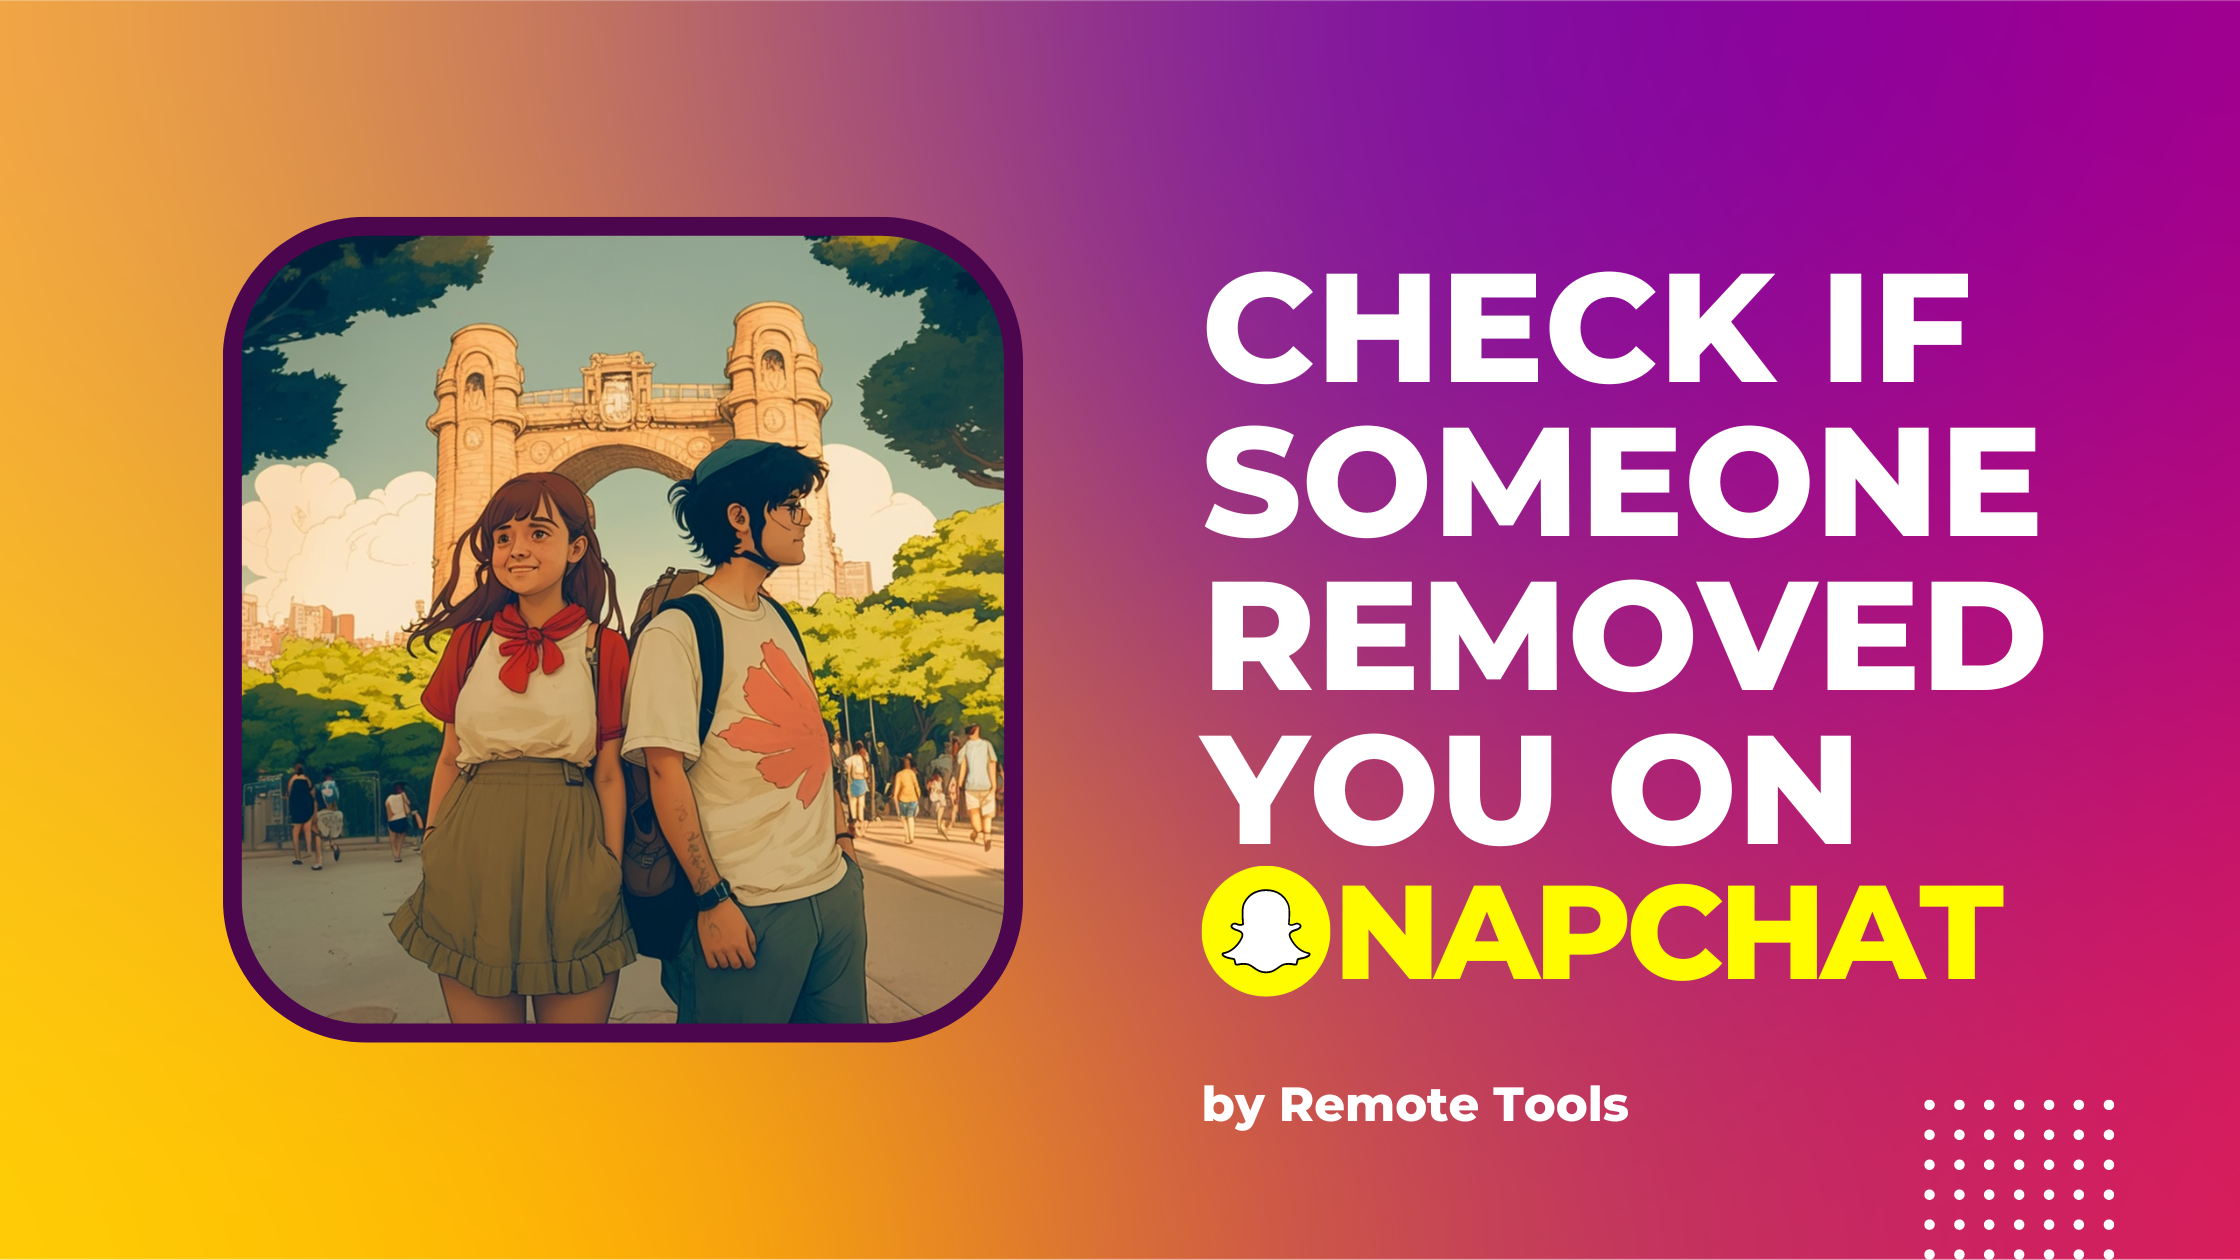 Remote.tools shares steps to check if someone removed you on Snapchat. Click to know how.